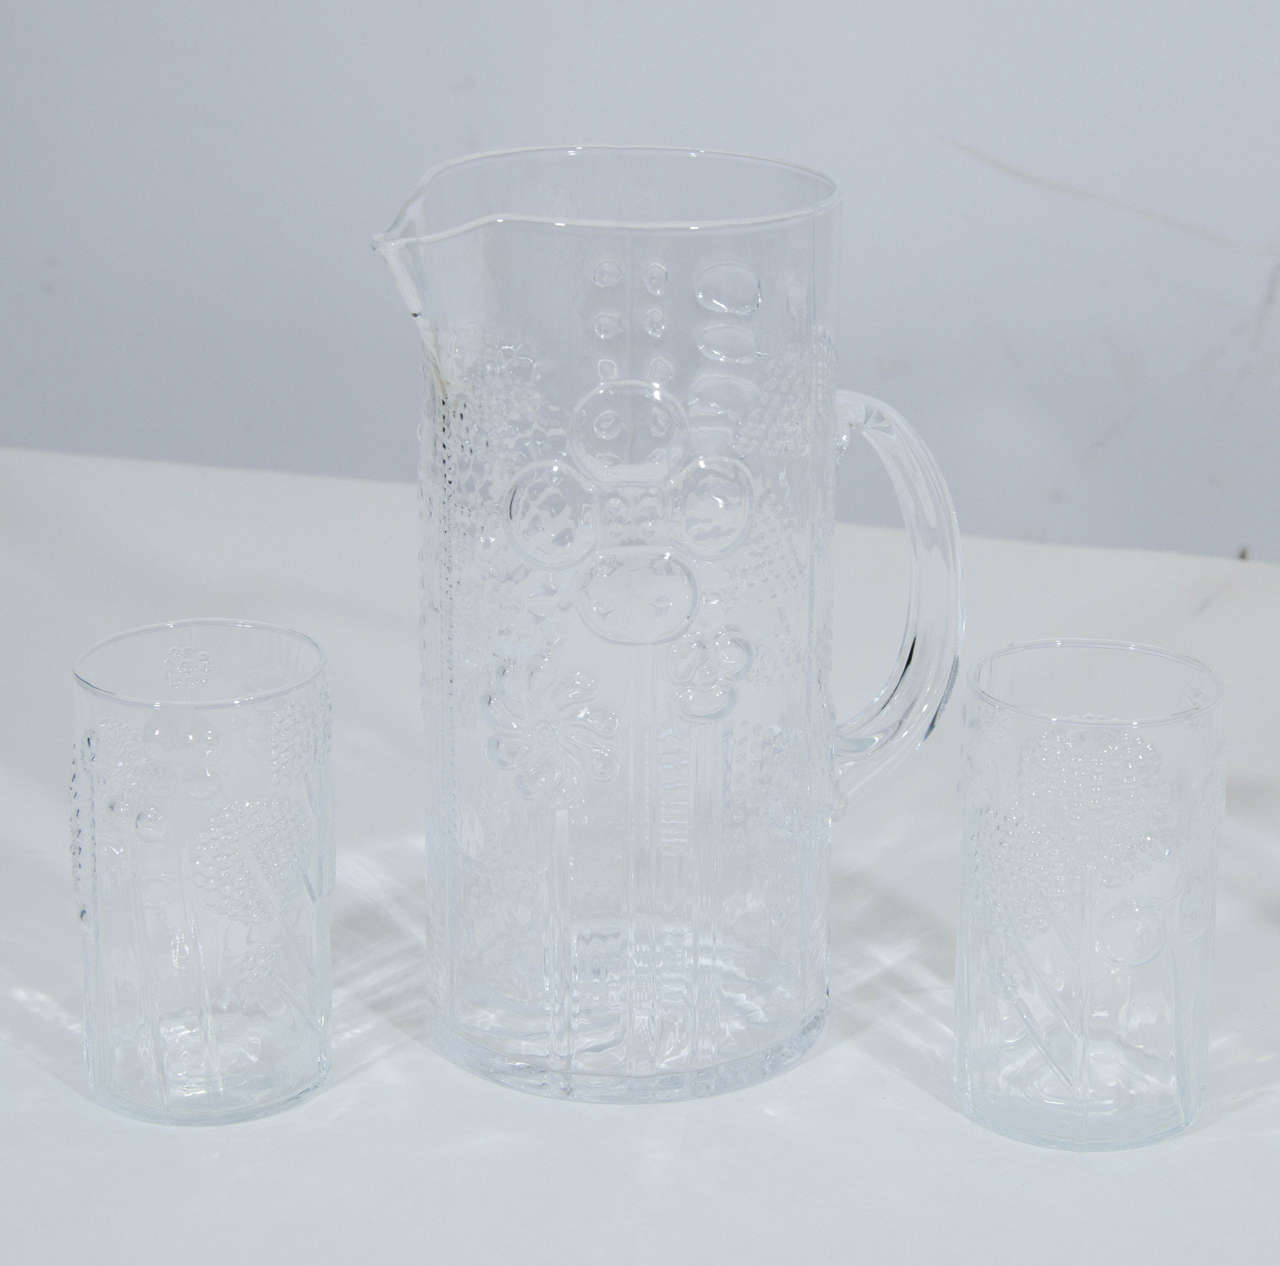 Beautiful and charming crystal pitcher and six glasses in the Flora series by Oiva Toikka. Dimensions below are for pitcher; the dimensions of each glass is 4.38 height x 2.5 diameter. Glasses are handblown and dimensions vary slightly. Please